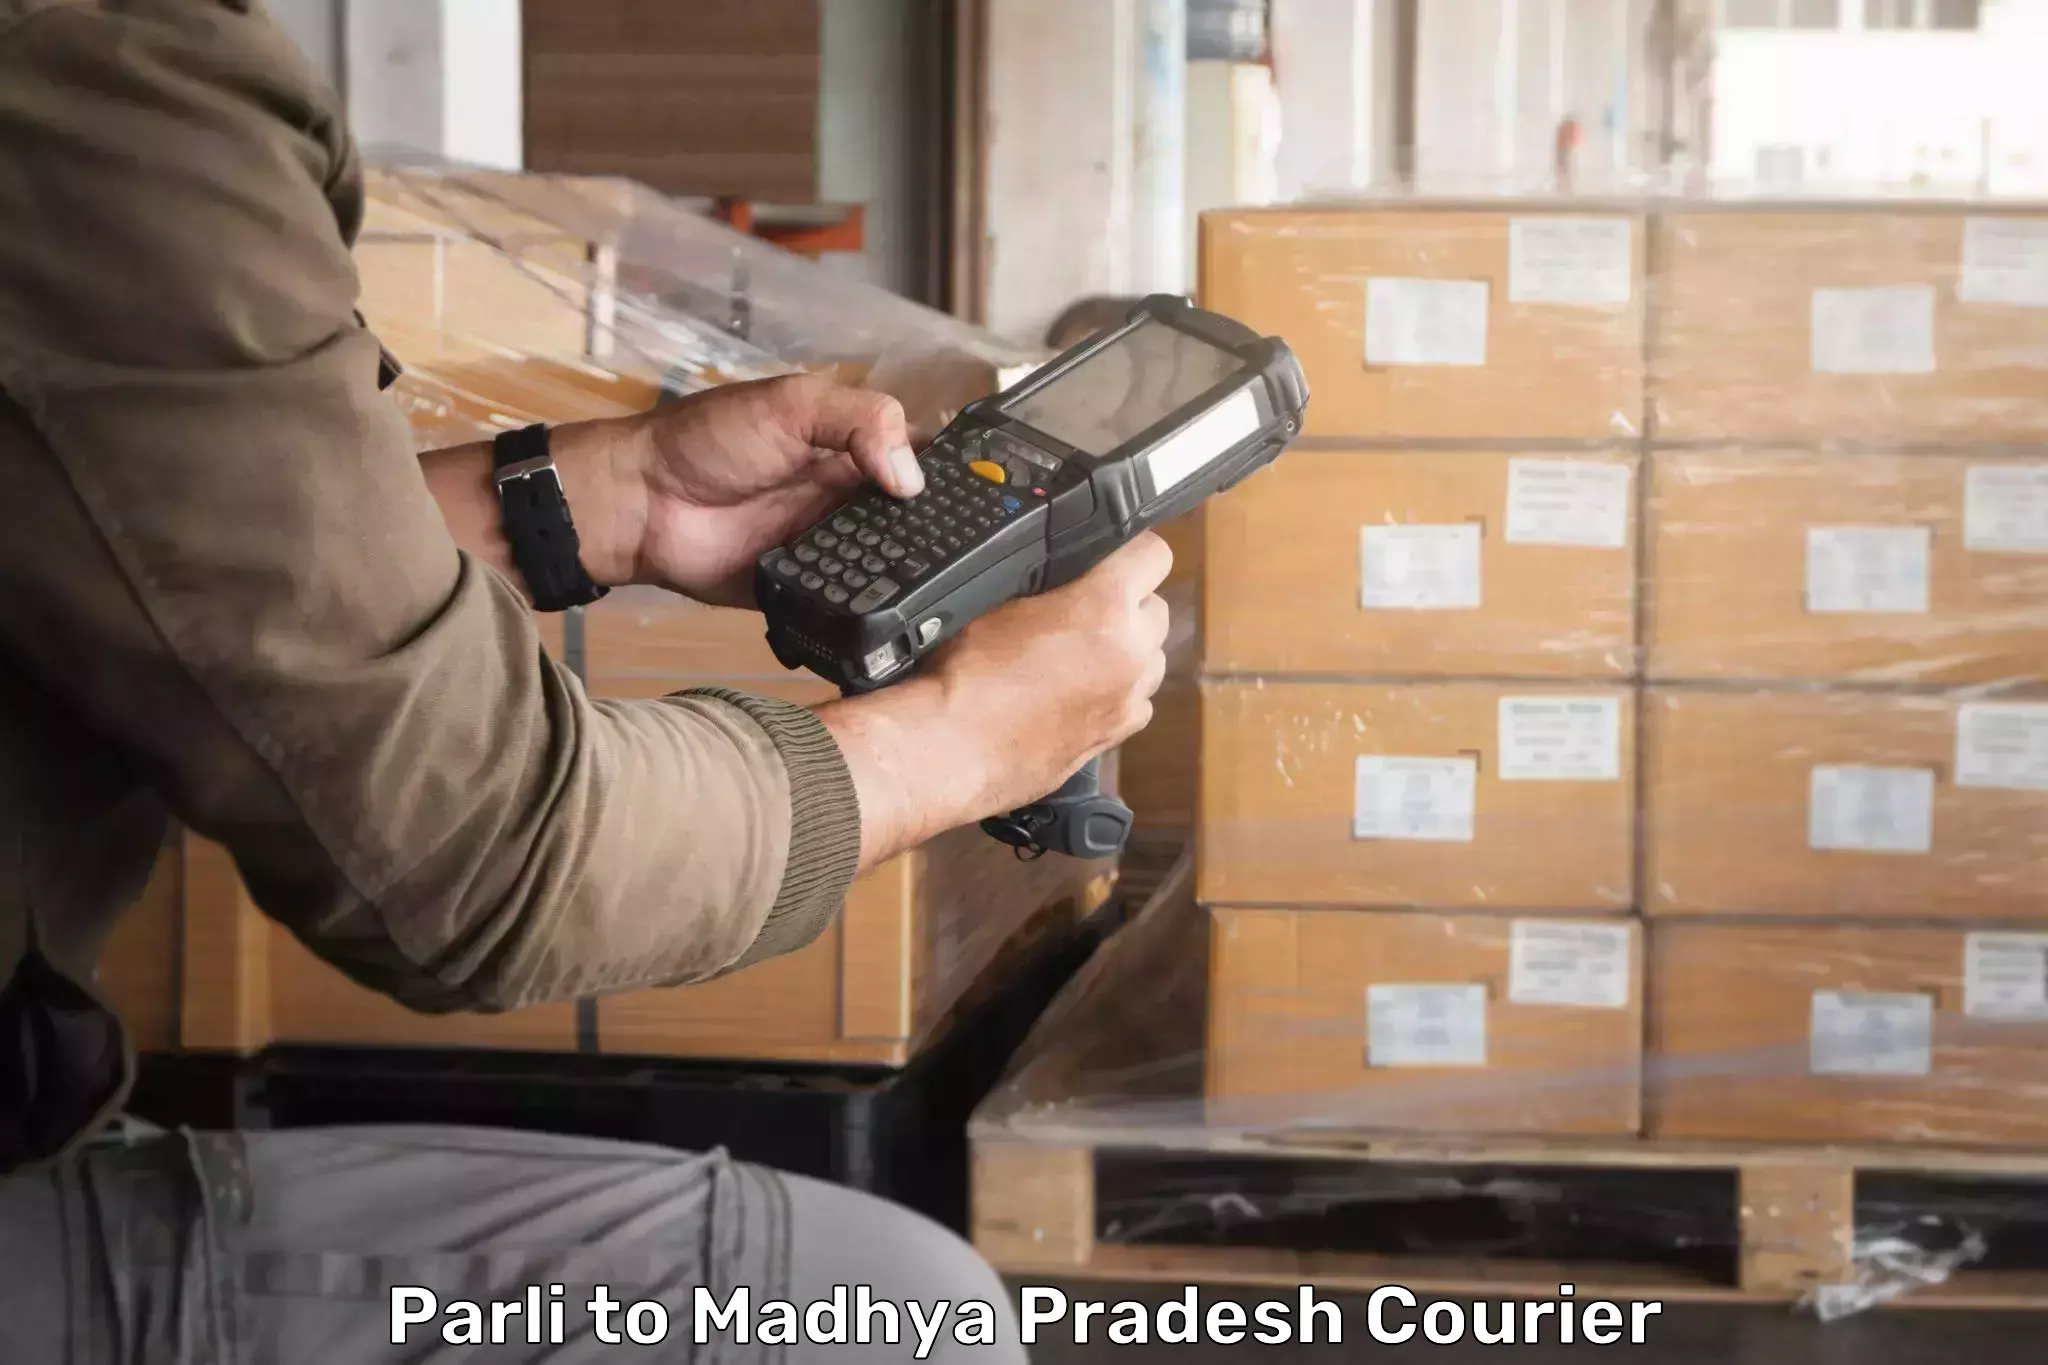 Next-generation courier services Parli to Maheshwar